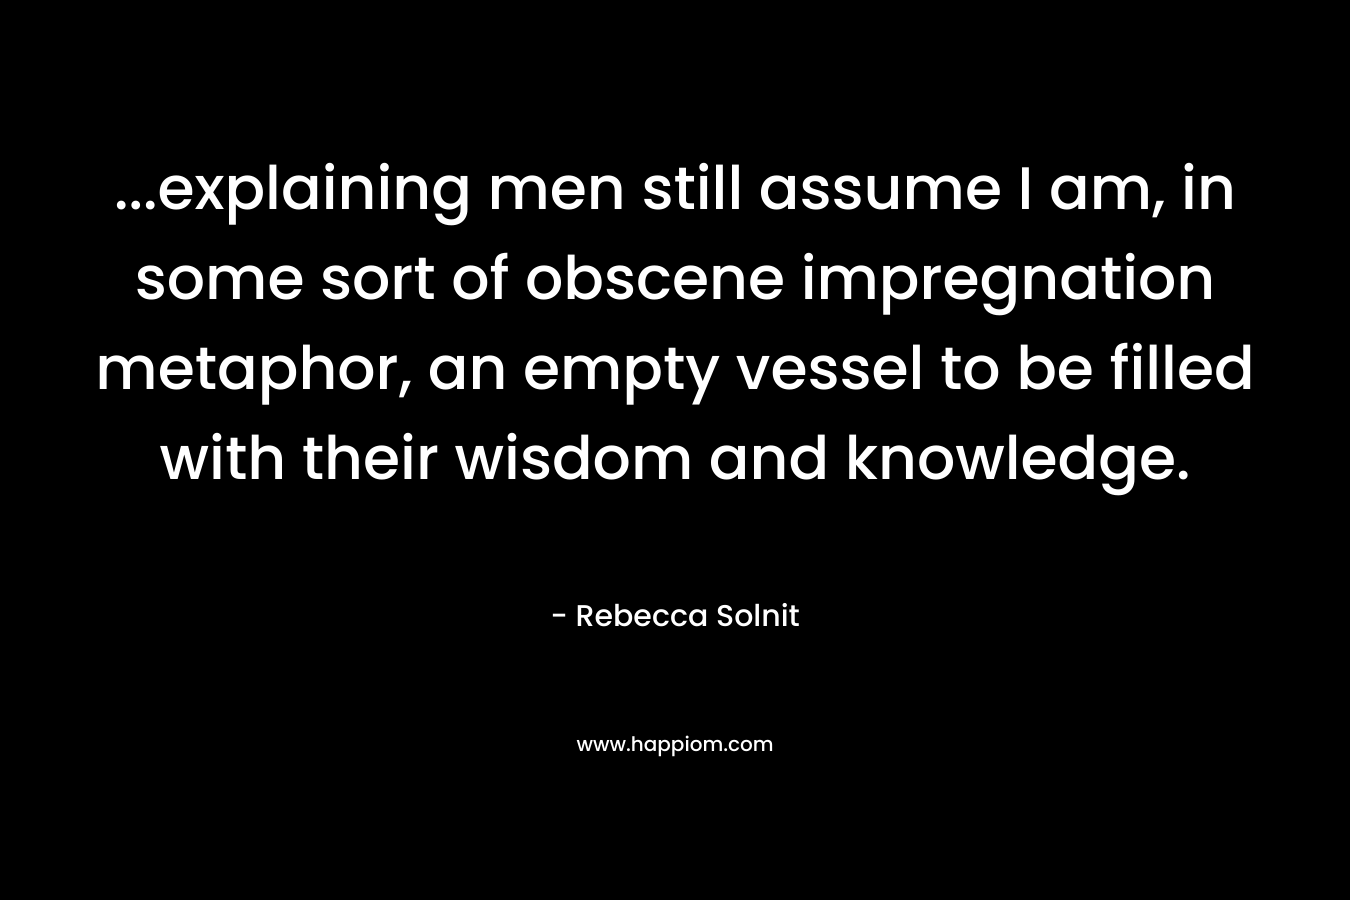 ...explaining men still assume I am, in some sort of obscene impregnation metaphor, an empty vessel to be filled with their wisdom and knowledge.